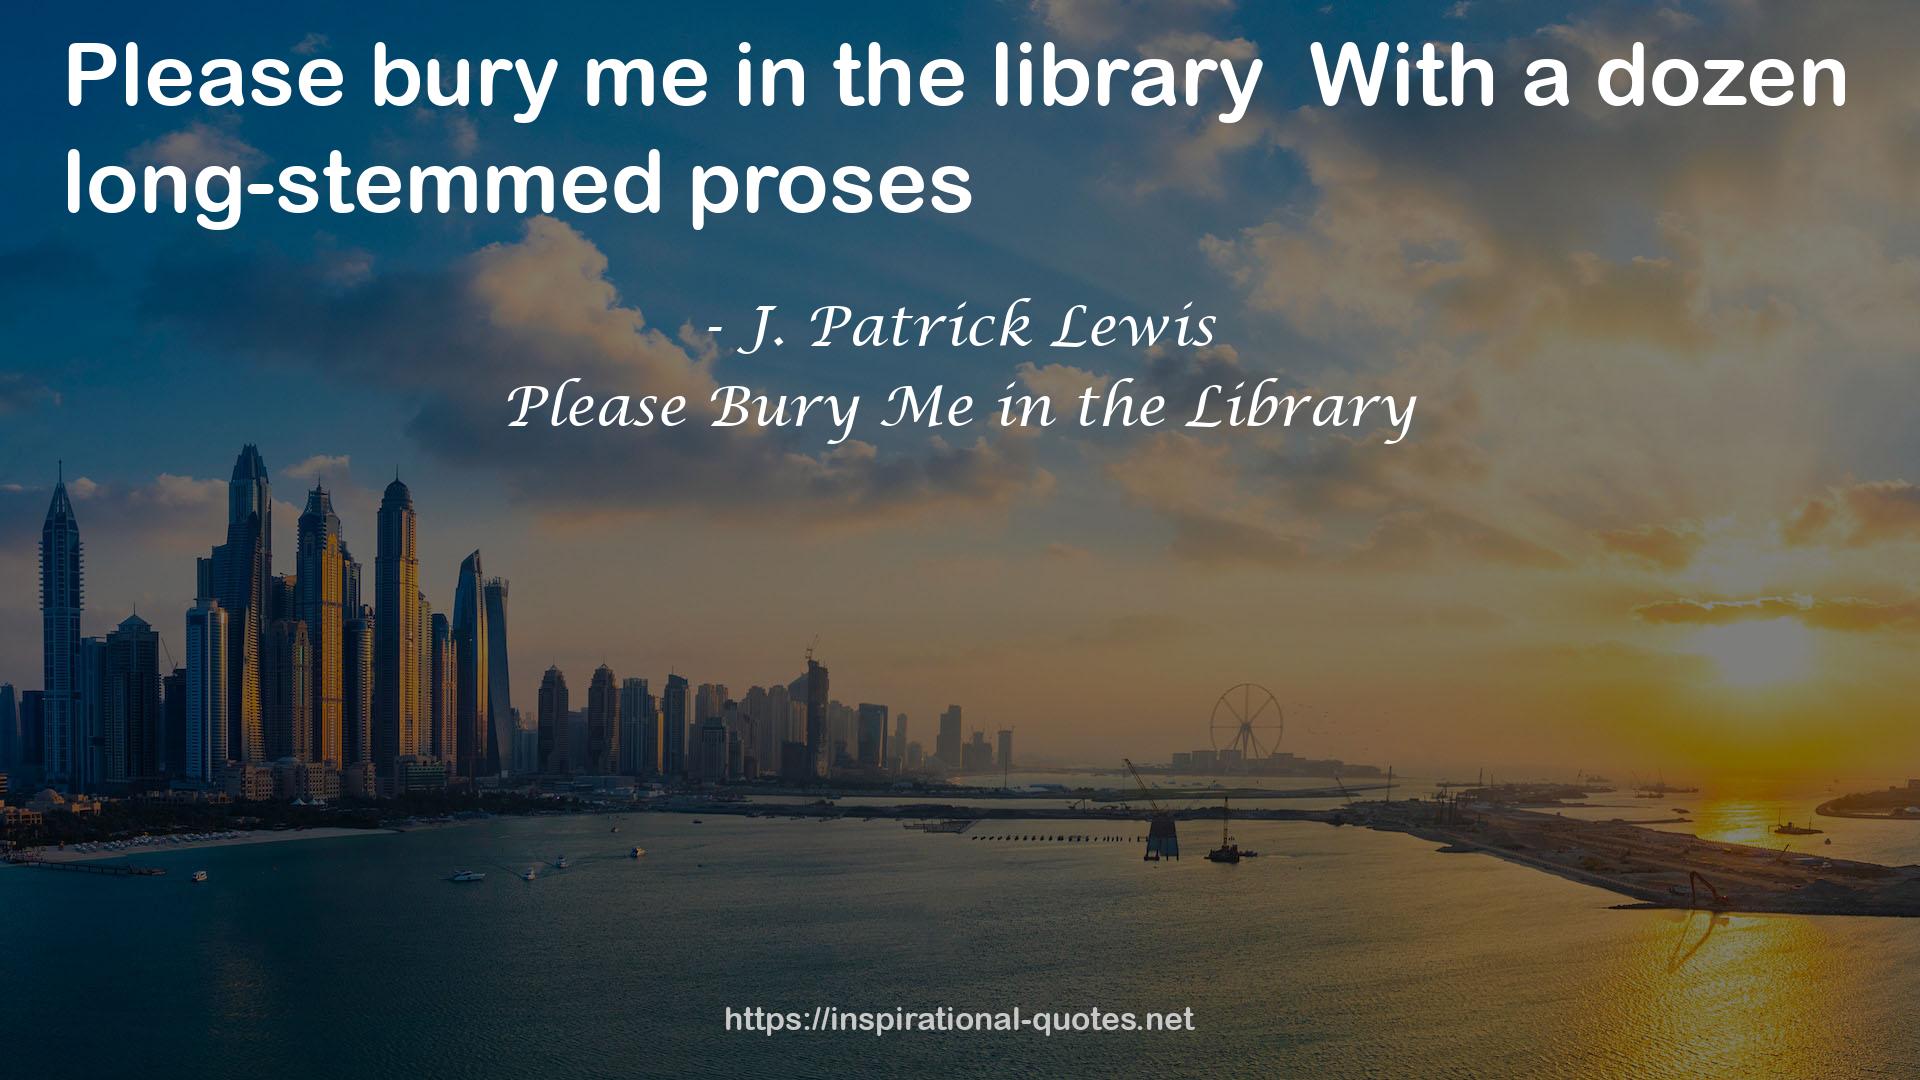 Please Bury Me in the Library QUOTES